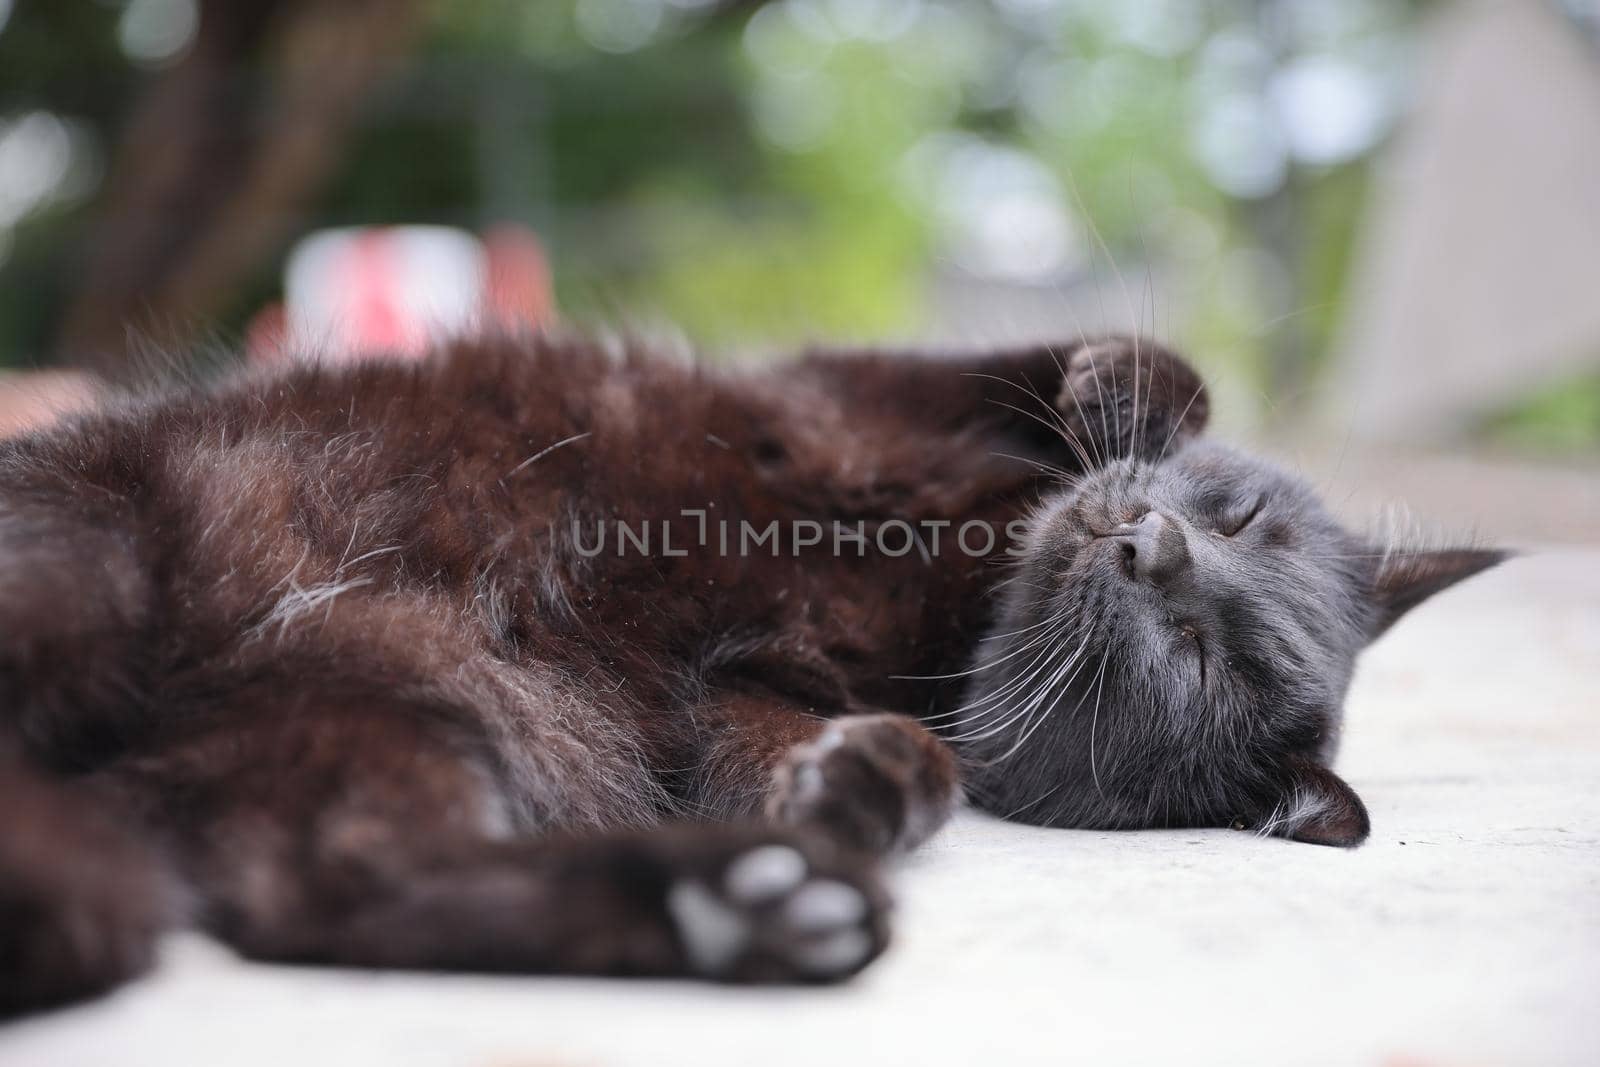 Black cat sleep at outdoor background by piyato